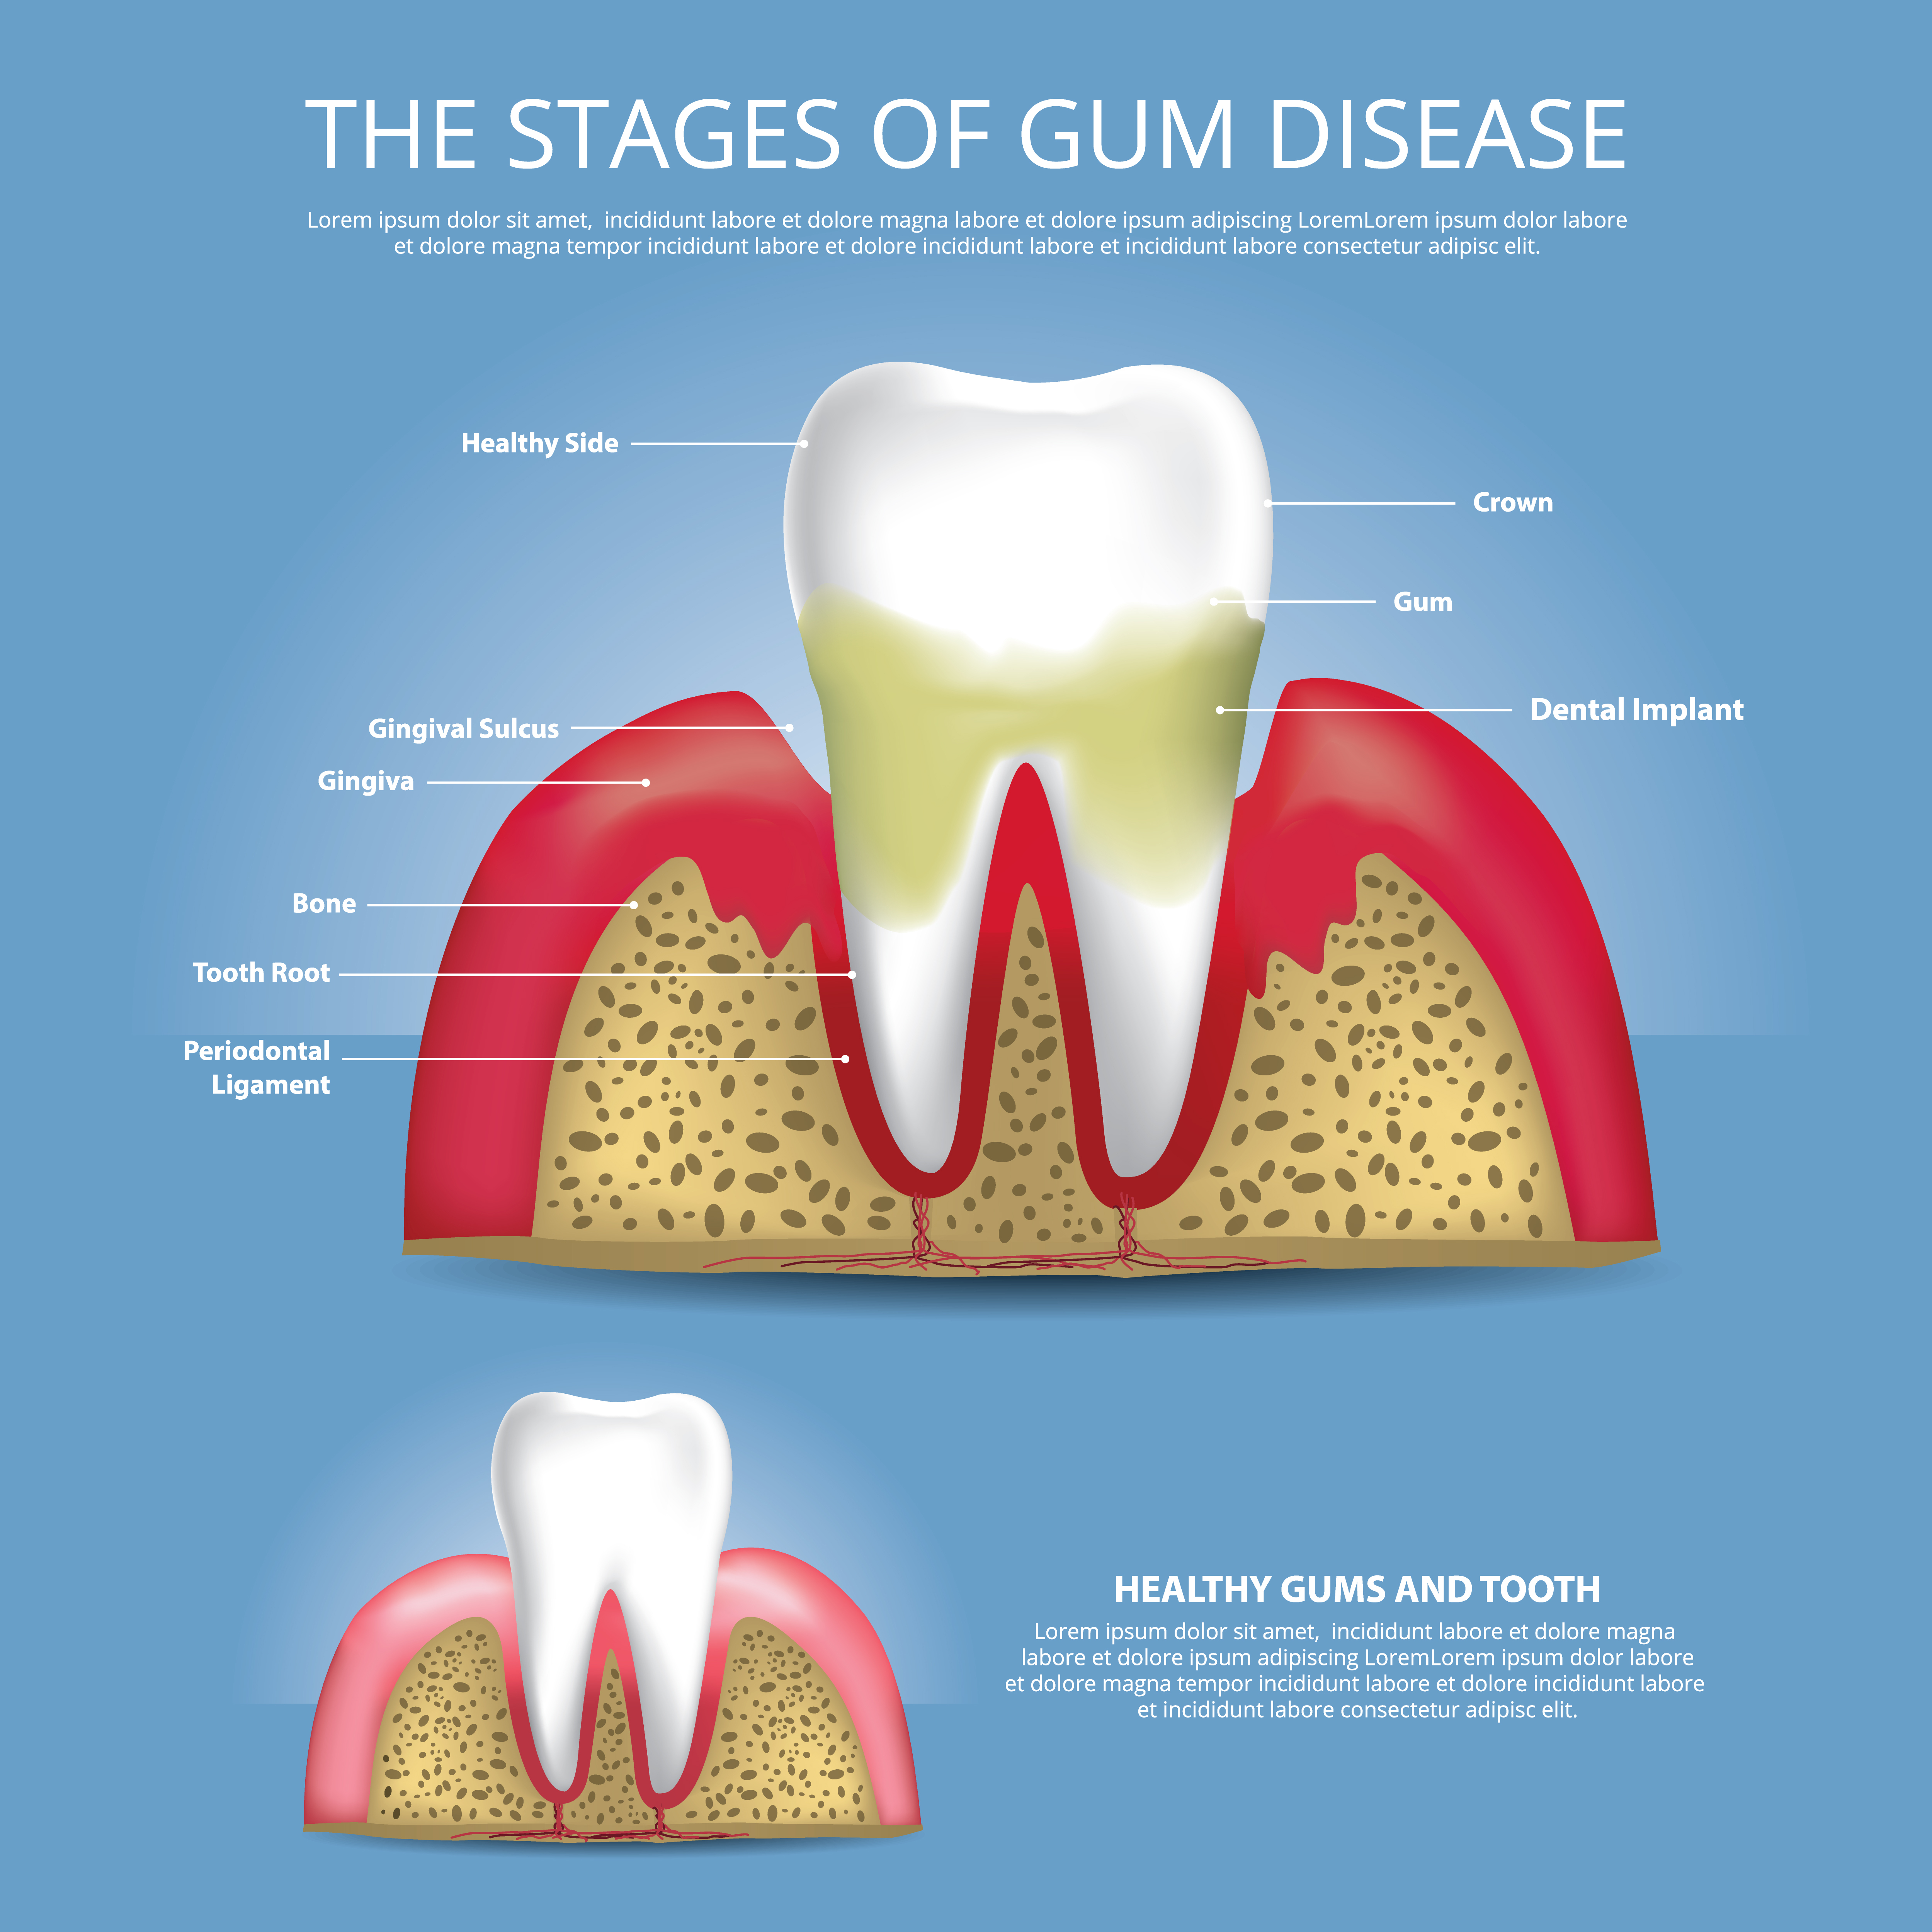 artists' rendering of the stages of gum disease